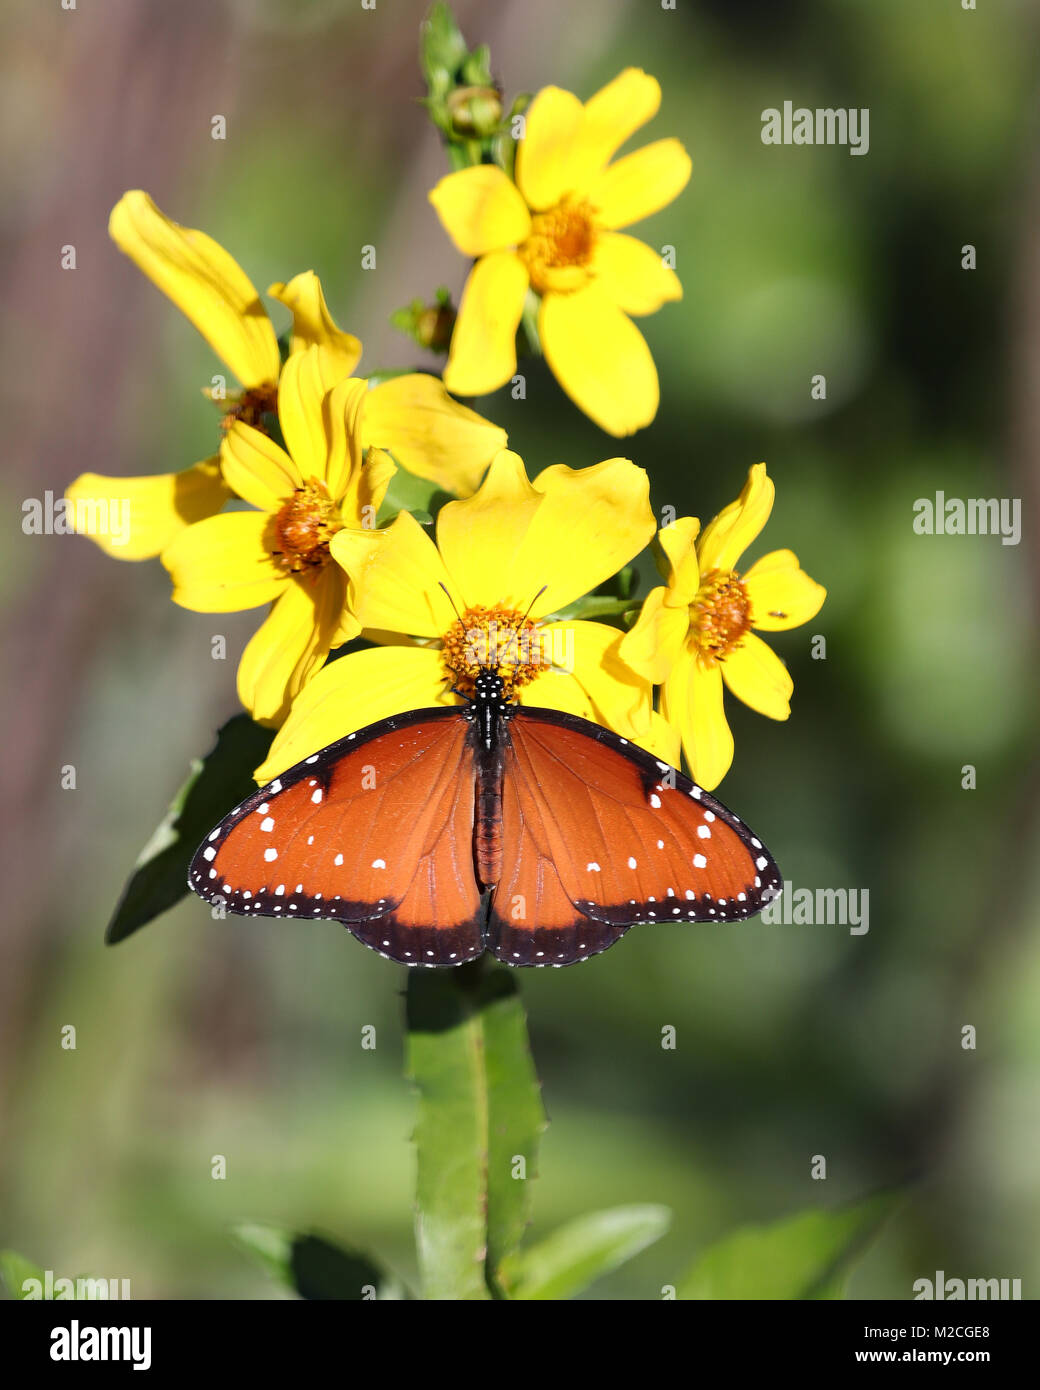 Yellow flowers attract the attention of a Queen butterfly at Paynes Prairie Preserve state park in Gainesville, Florida Stock Photo